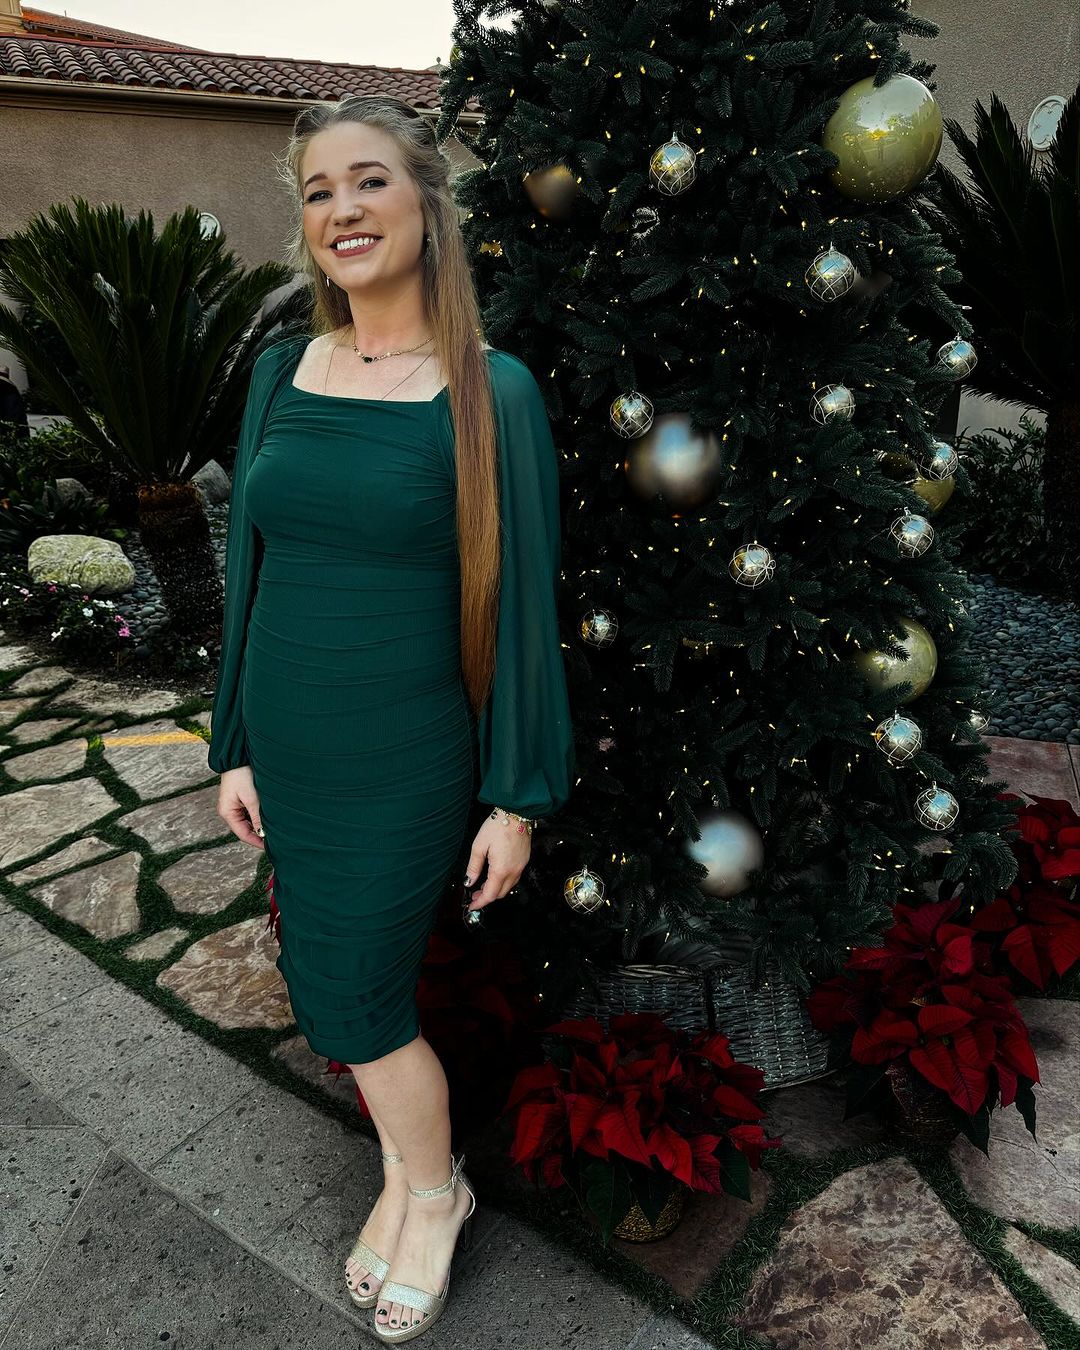 The daughter of Christine and Kody Brown showed off her weight loss in a skintight emerald green dress